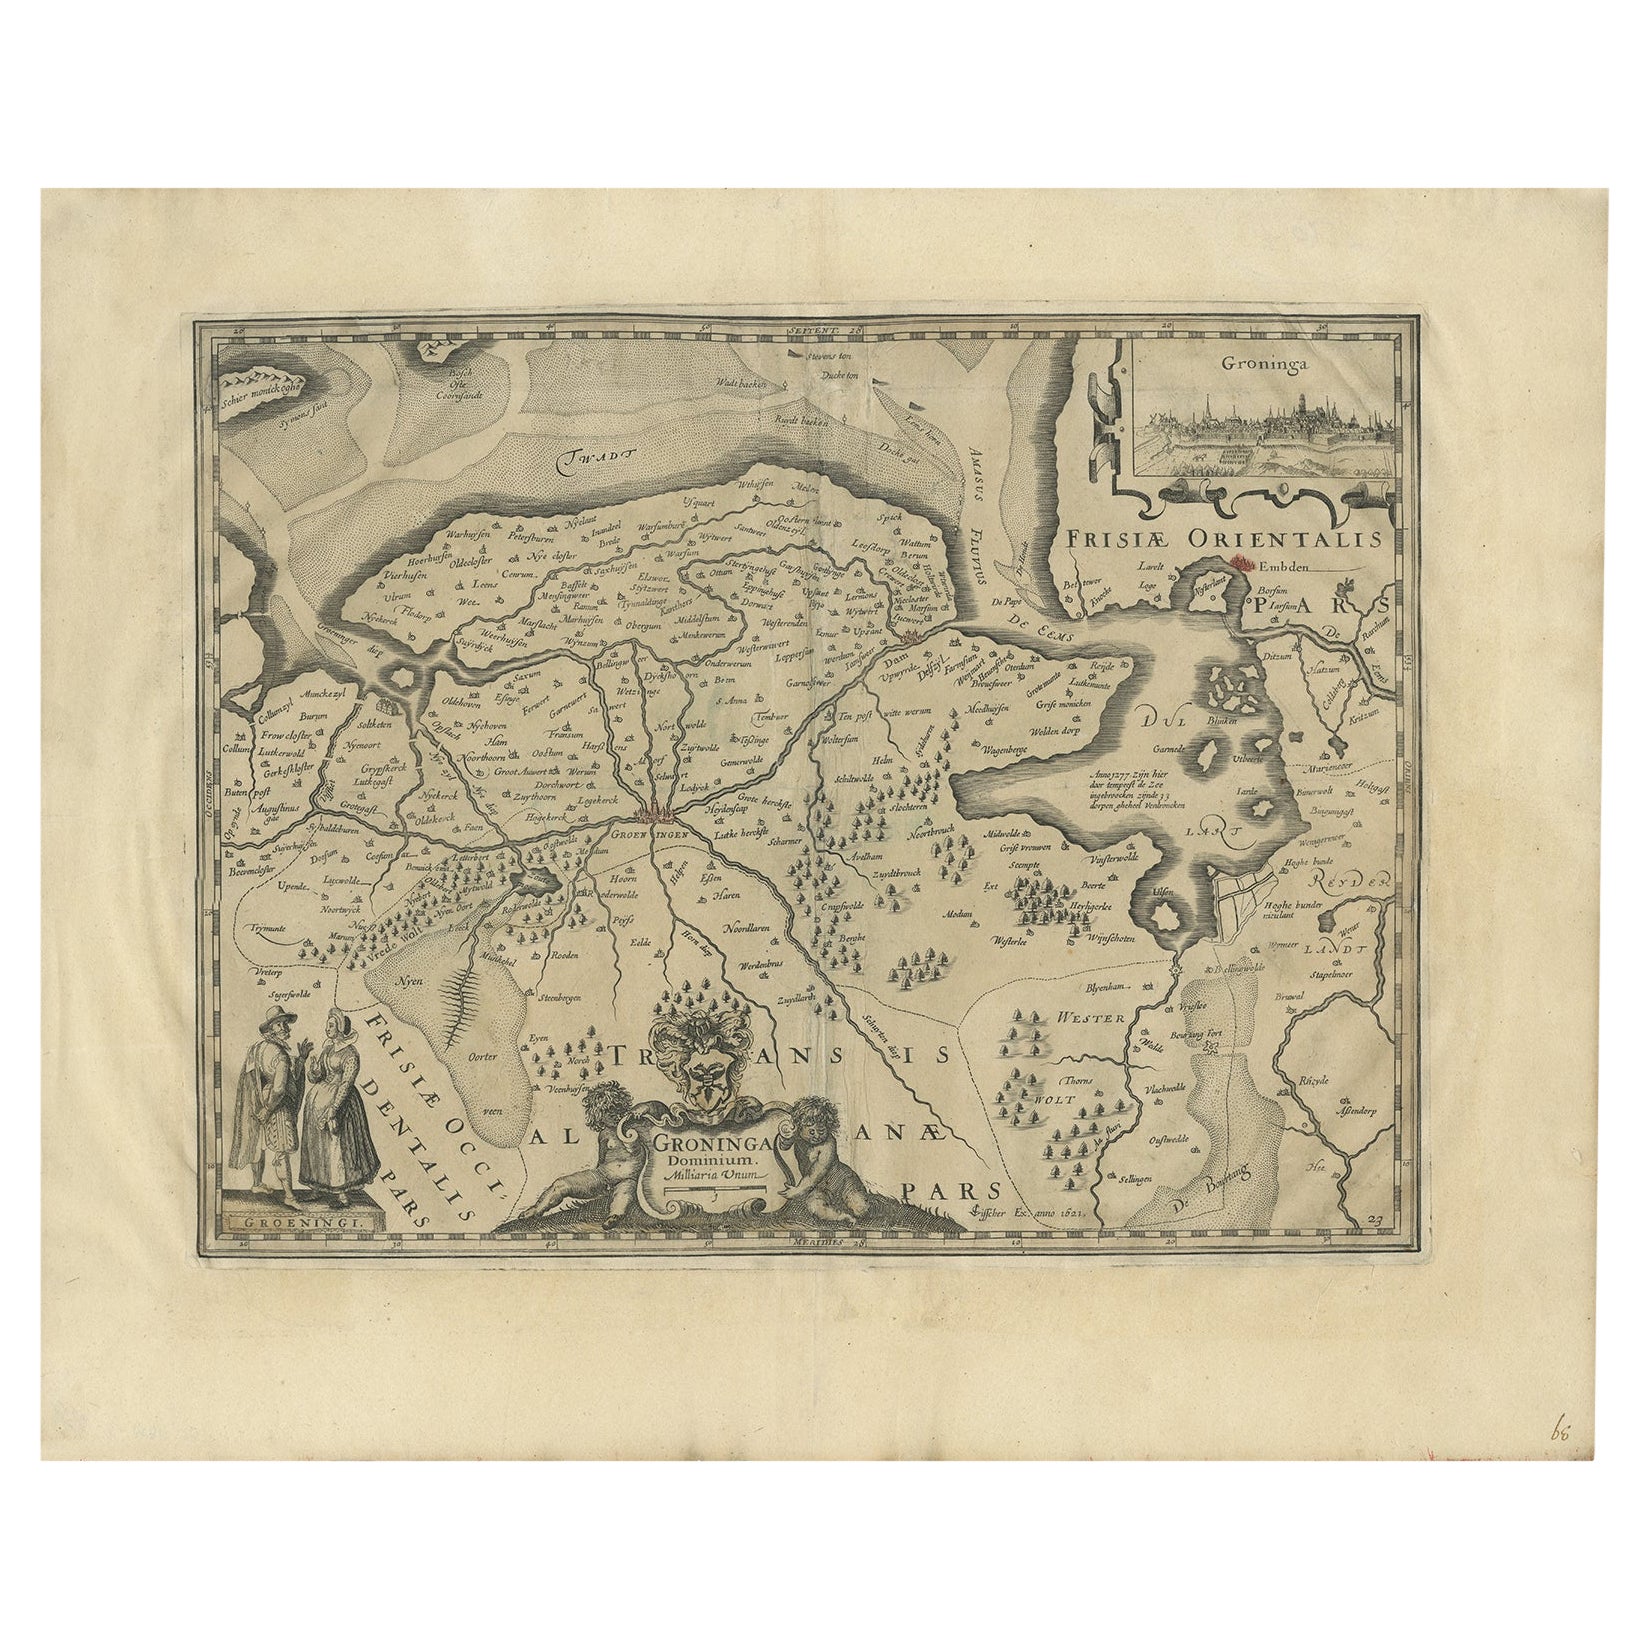 Antique Map of the Province of Groningen in the Netherlands, 1634